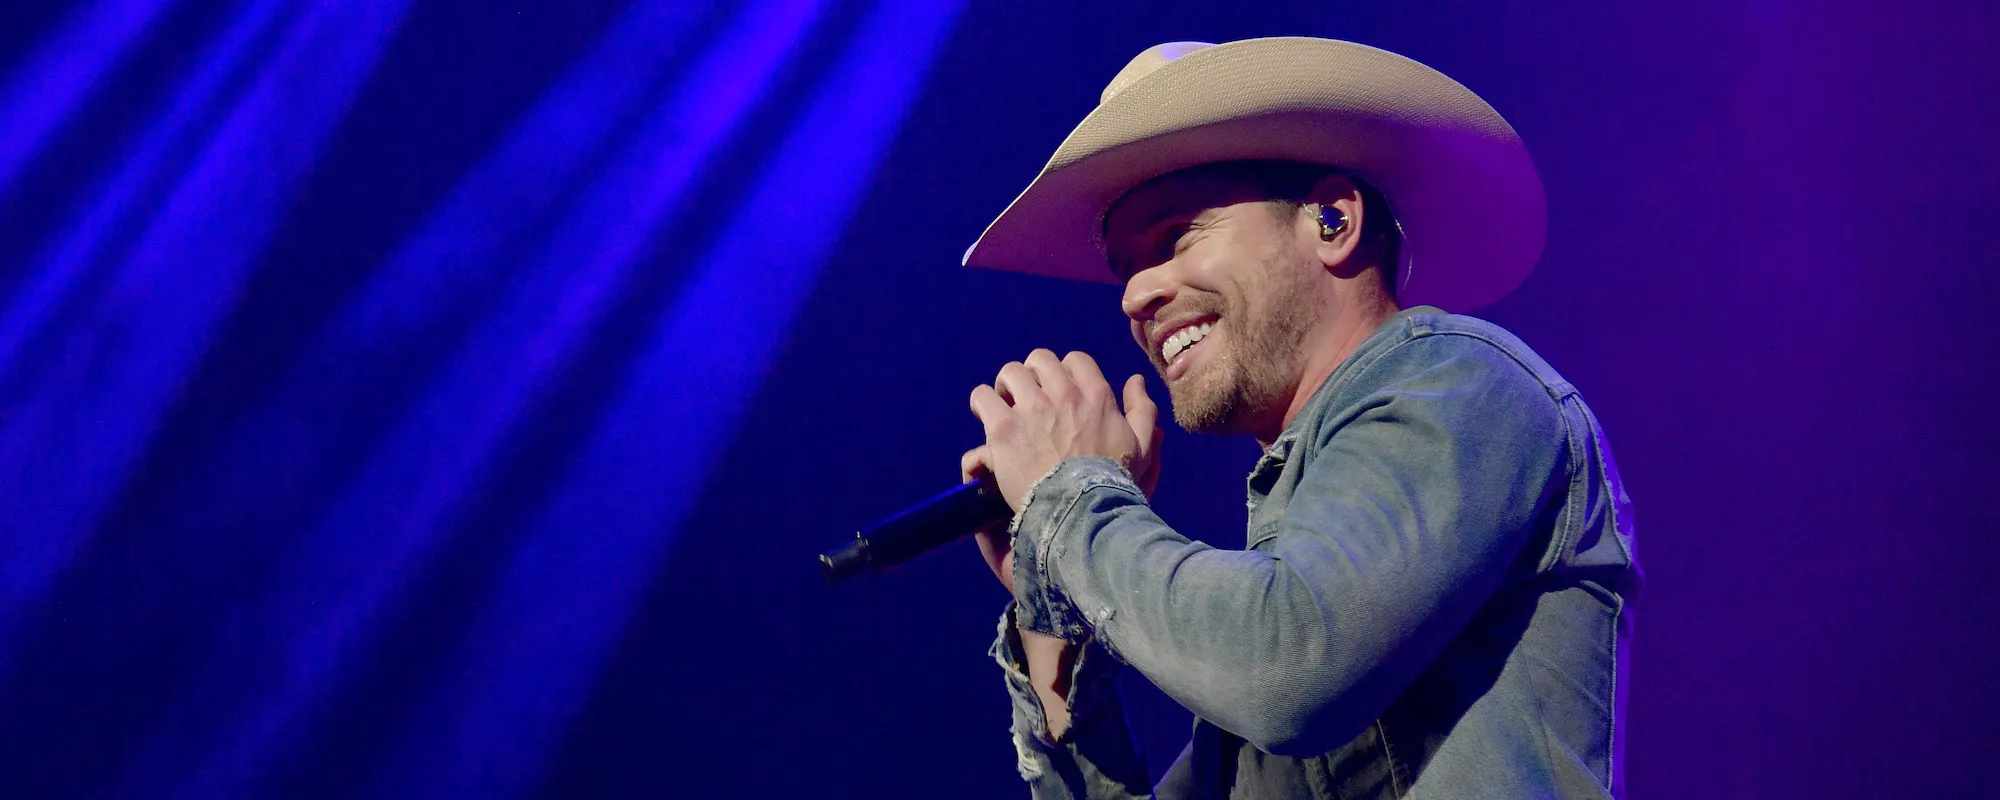 Dustin Lynch Shares the Meaning Behind His ‘Killed The Cowboy’ Closer “Long Way Home”